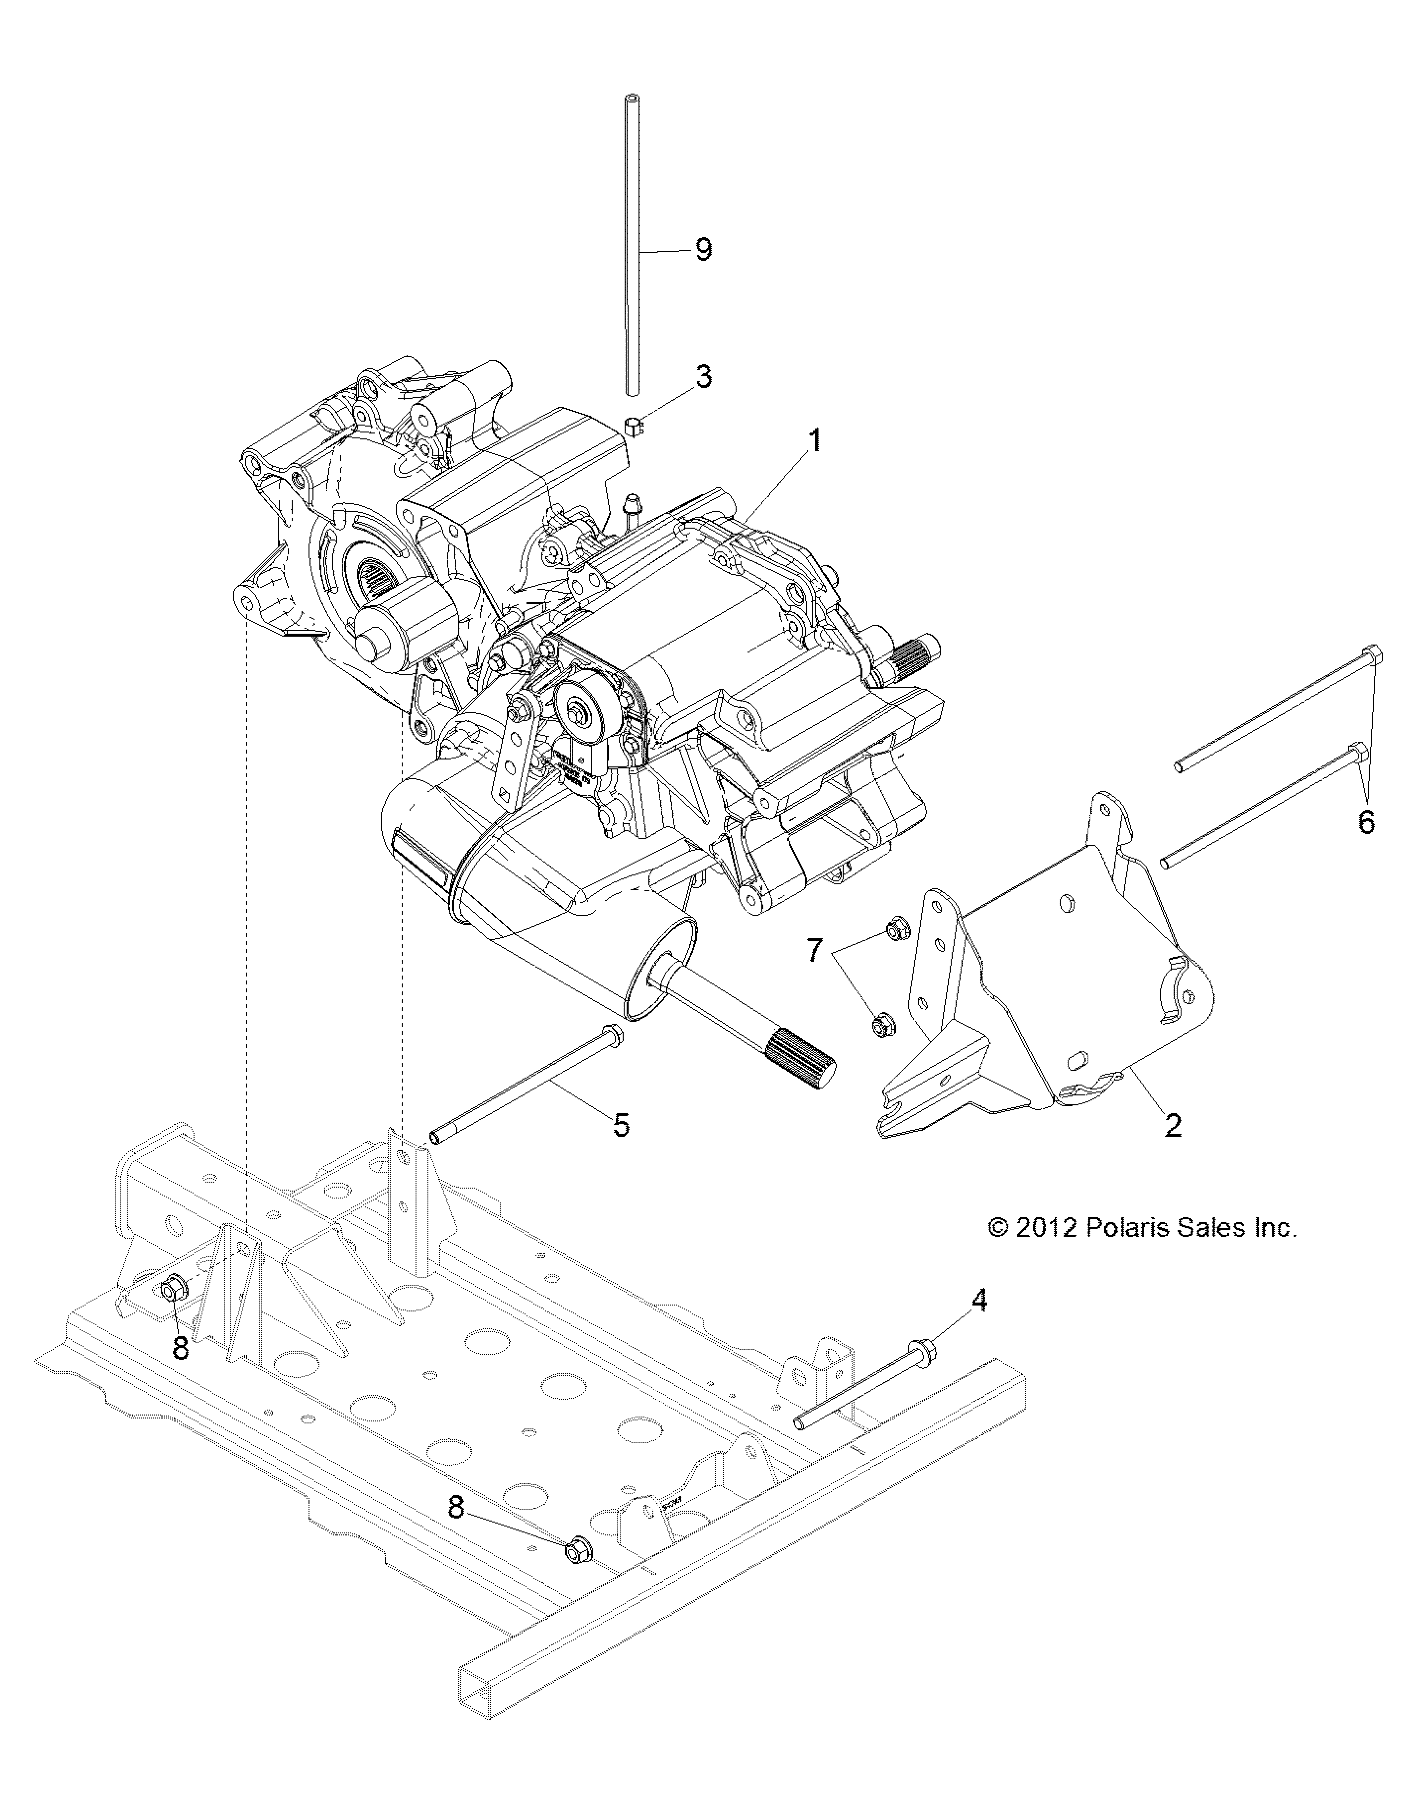 Part Number : 1333071 MAIN GEARCASE ASSEMBLY